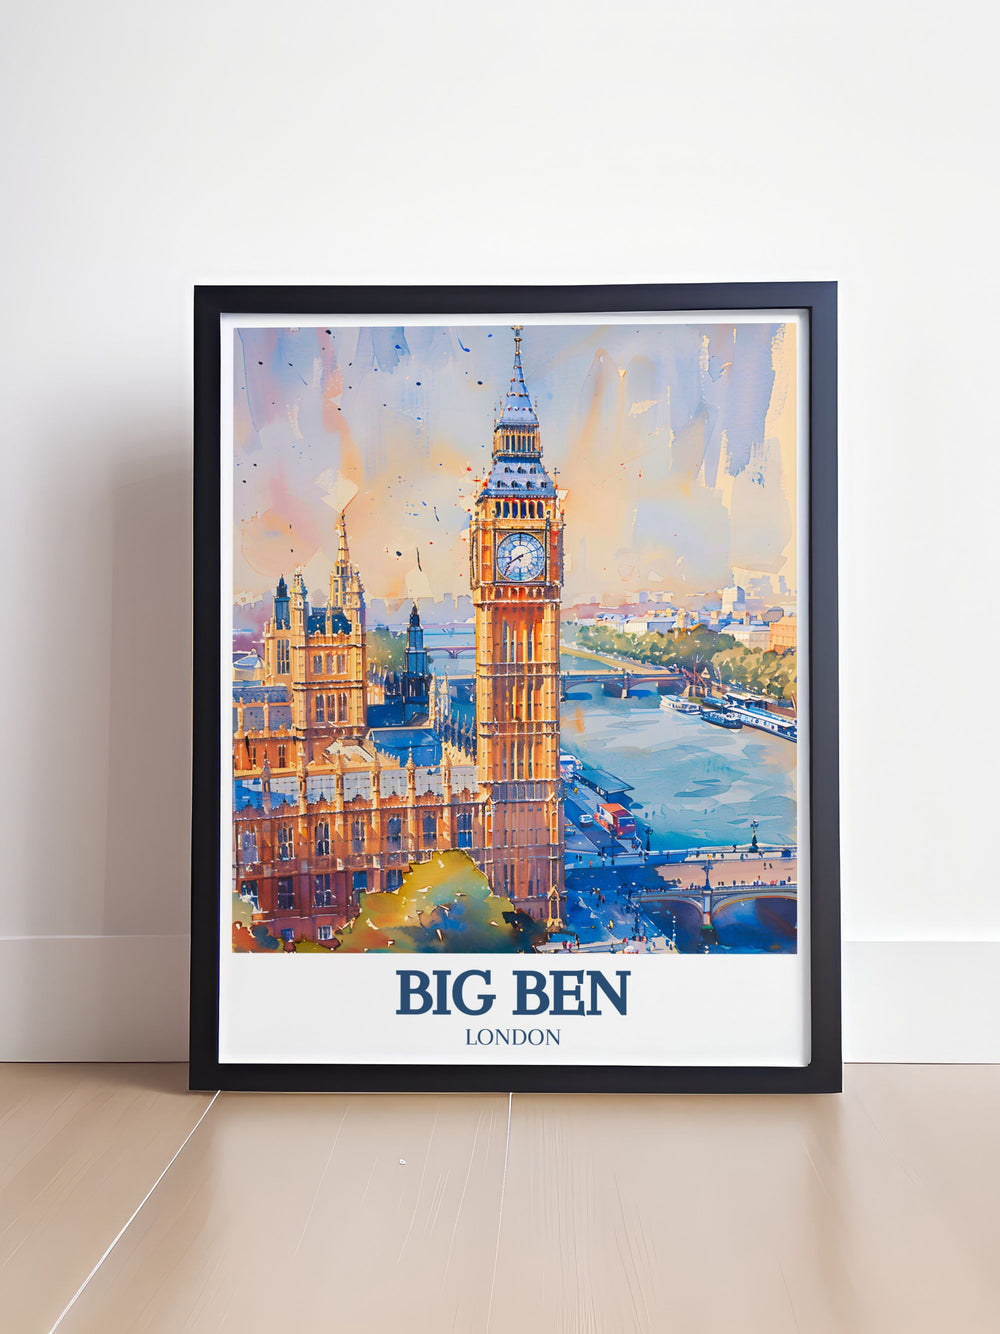 Stylish map of London, featuring key landmarks such as Big Ben, the Houses of Parliament, and the River Thames. Perfect for gifts or home decor, this print offers a unique representation of one of the worlds most iconic cities.